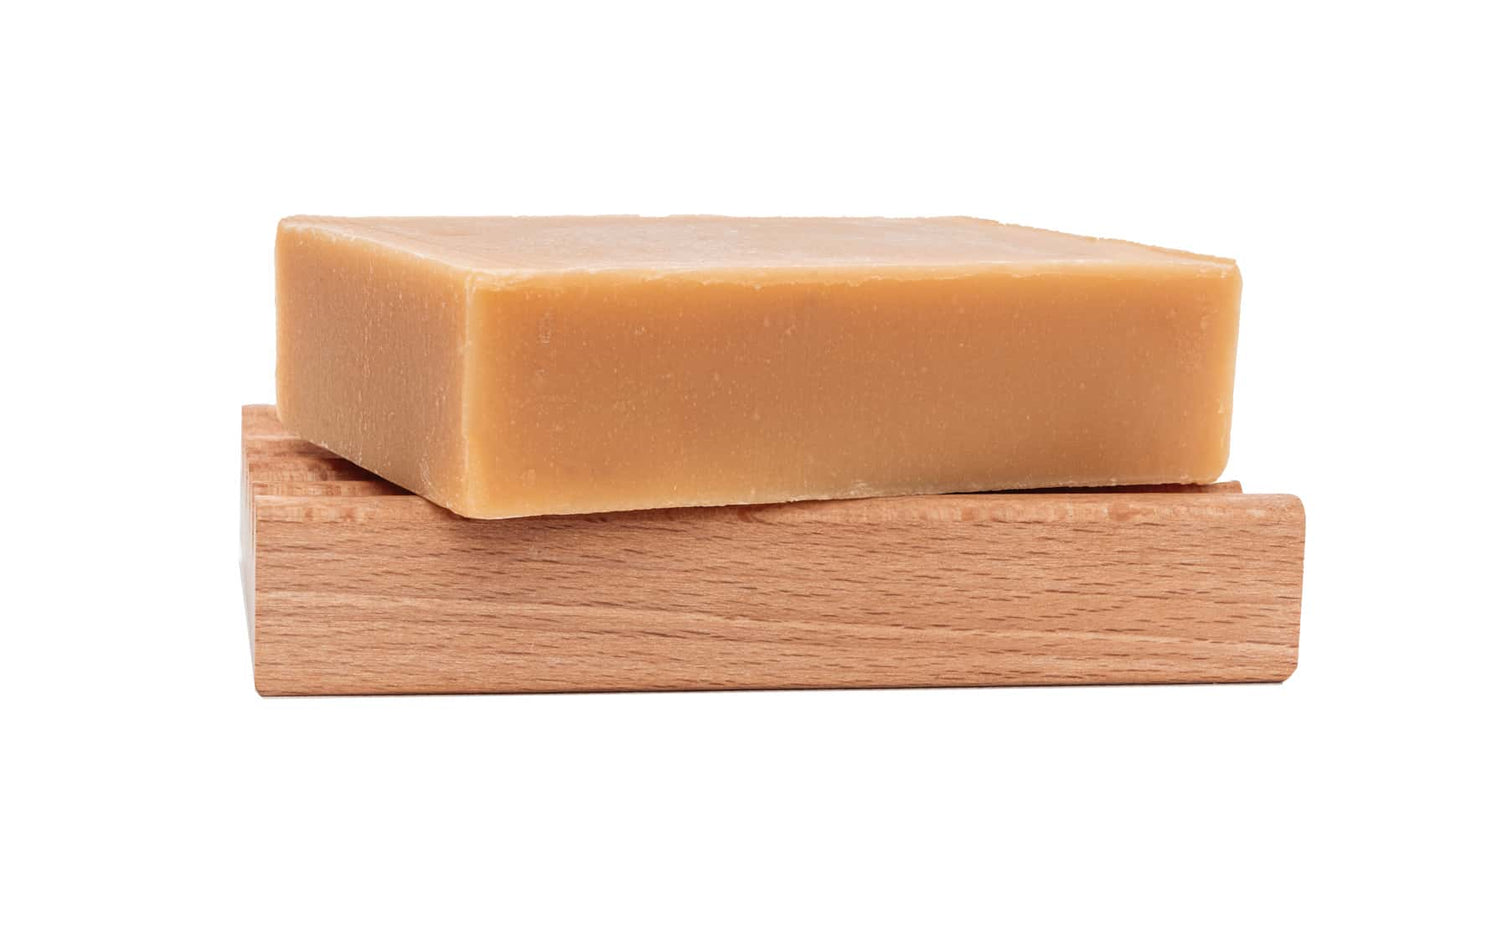 ON SALE: Buy in Bulk 25 Natural Soap Bars by Cold Process With